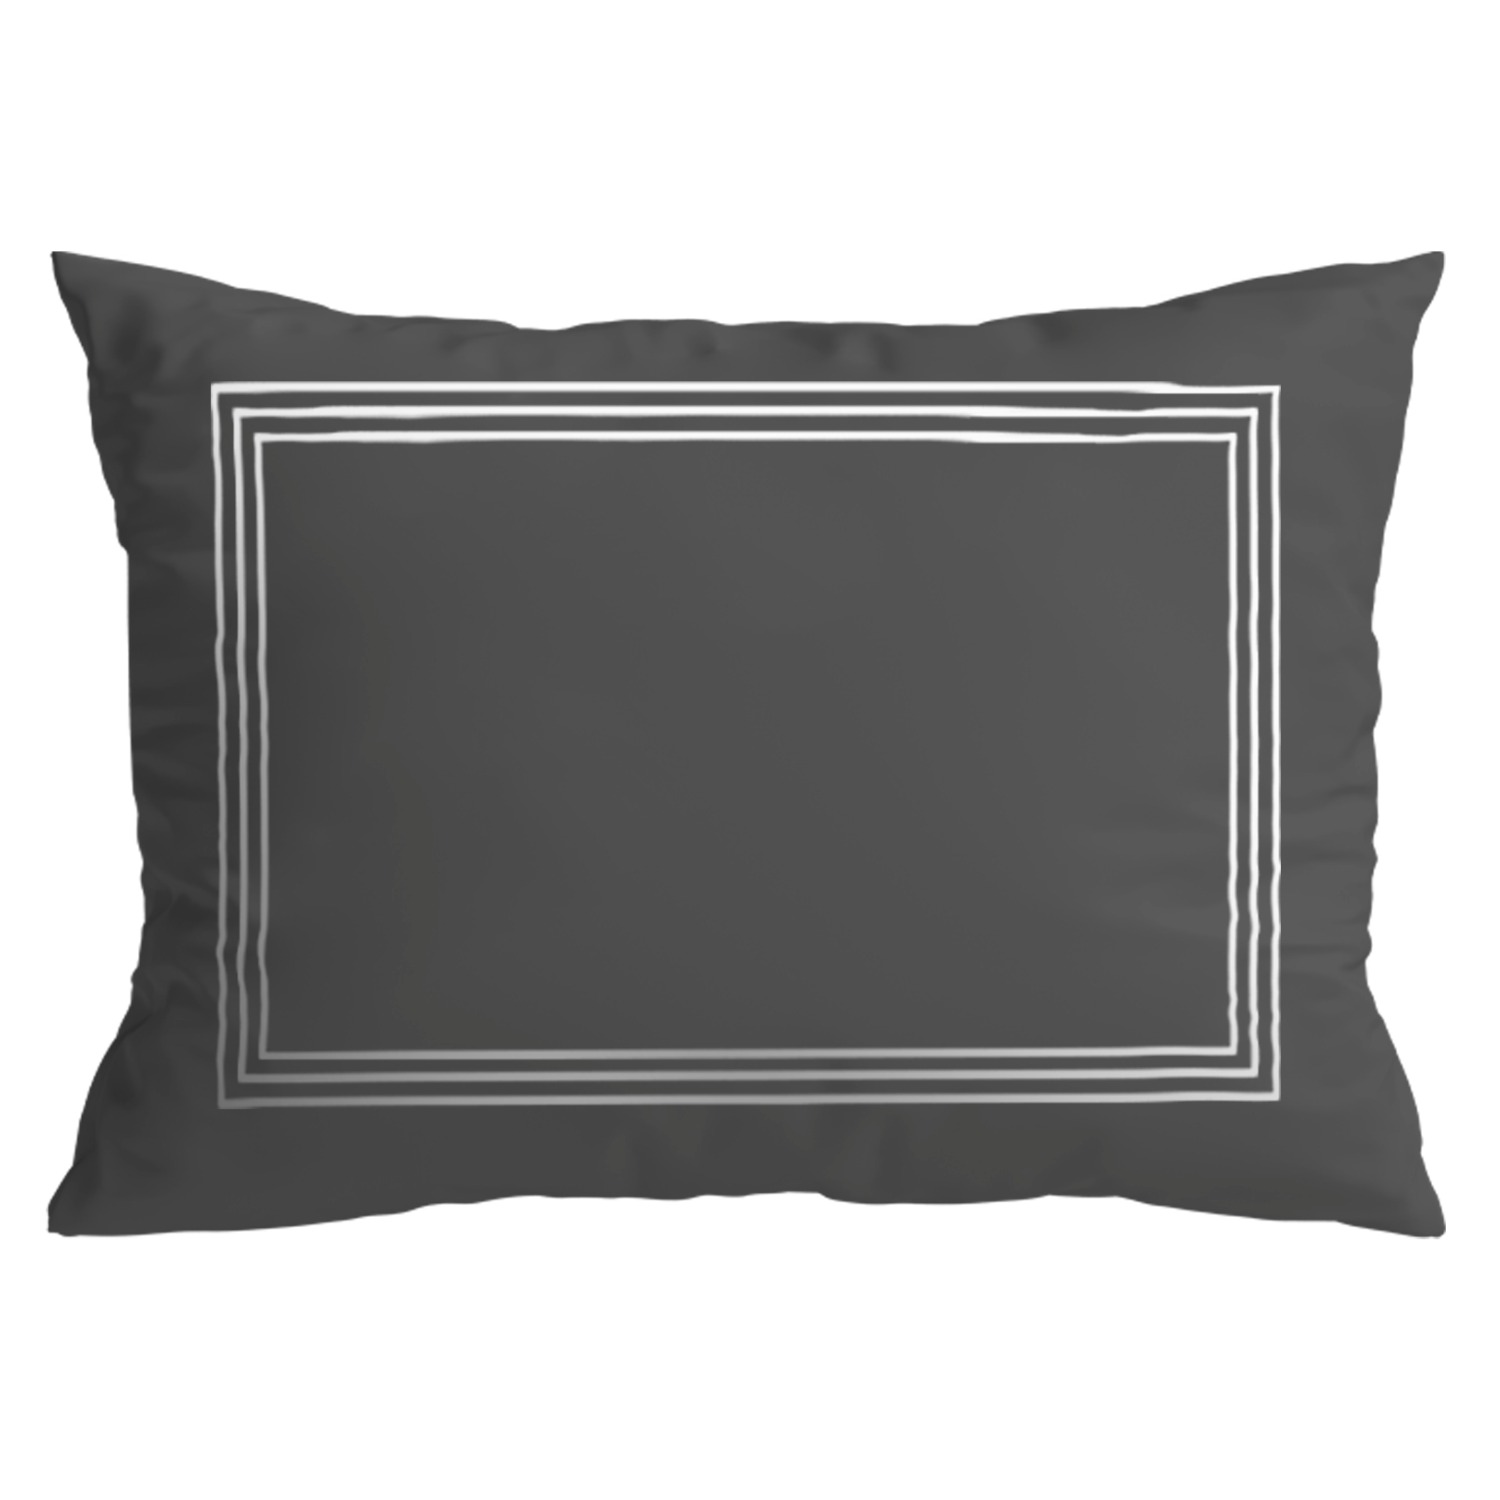 [maisone el BARA] Dear embroidery charcoal pillow cover